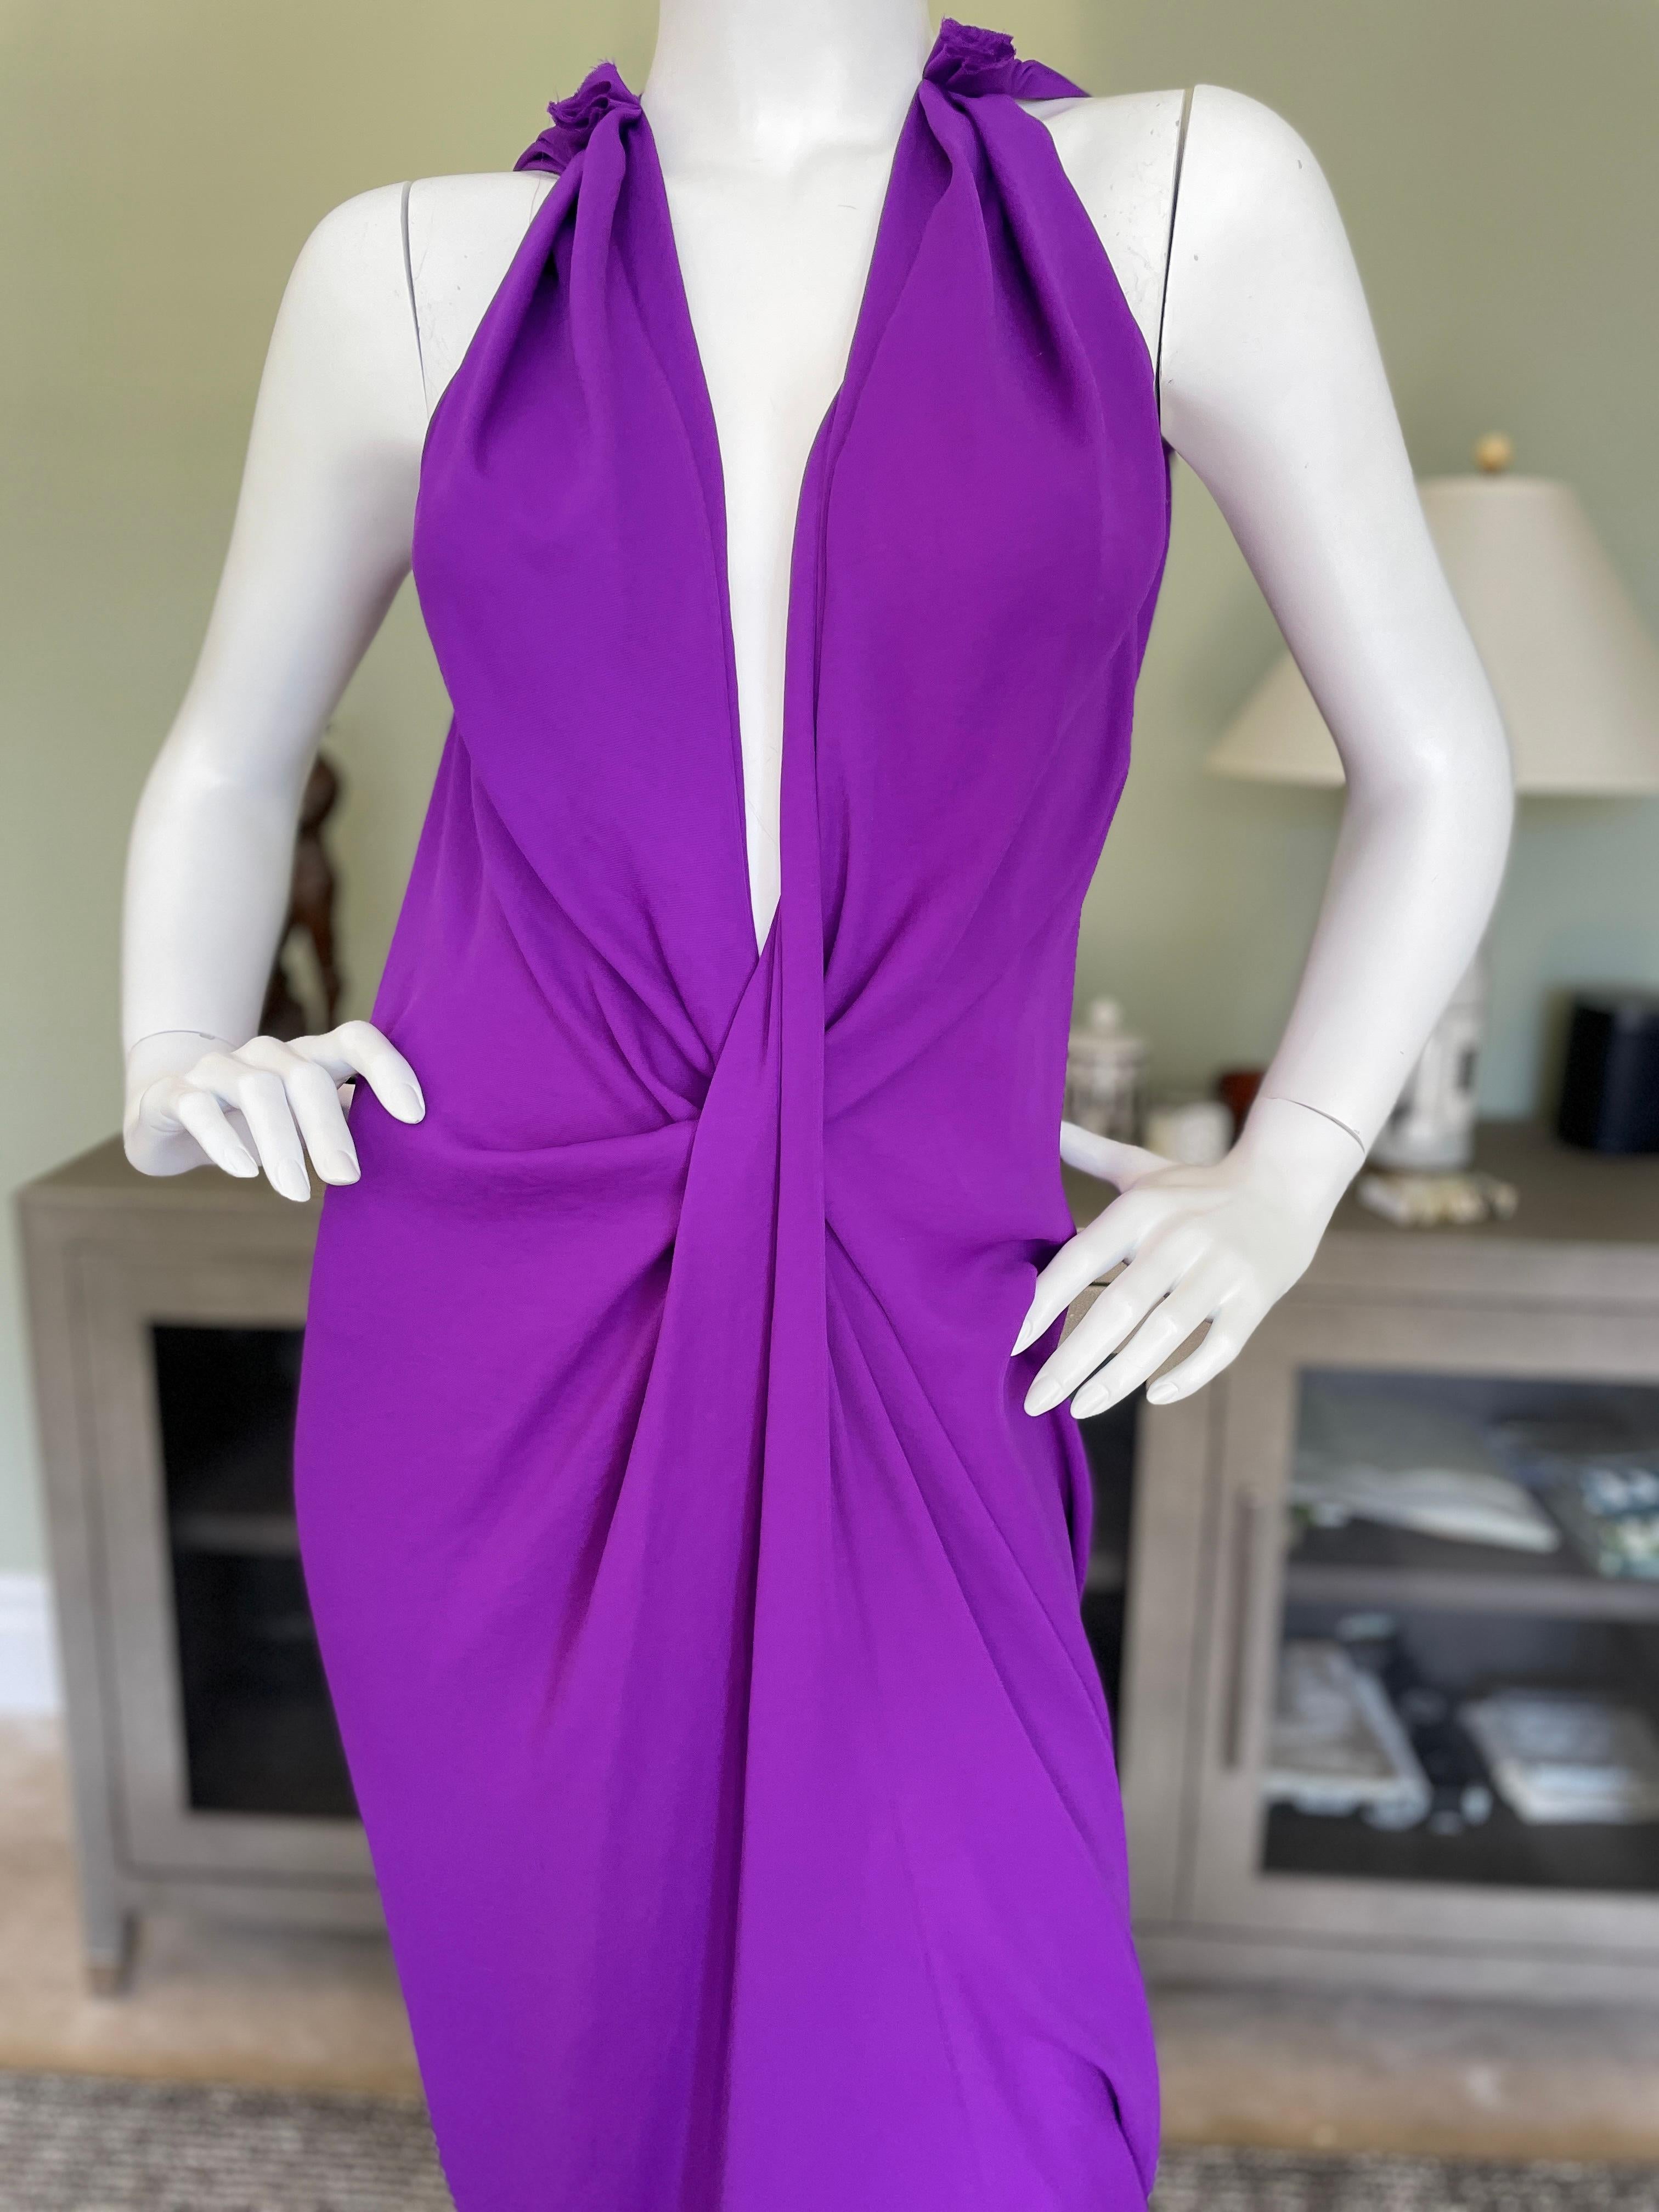  Lanvin by Alber Elbaz 2014 Plunging Purple Evening Dress with High Slit In Excellent Condition For Sale In Cloverdale, CA